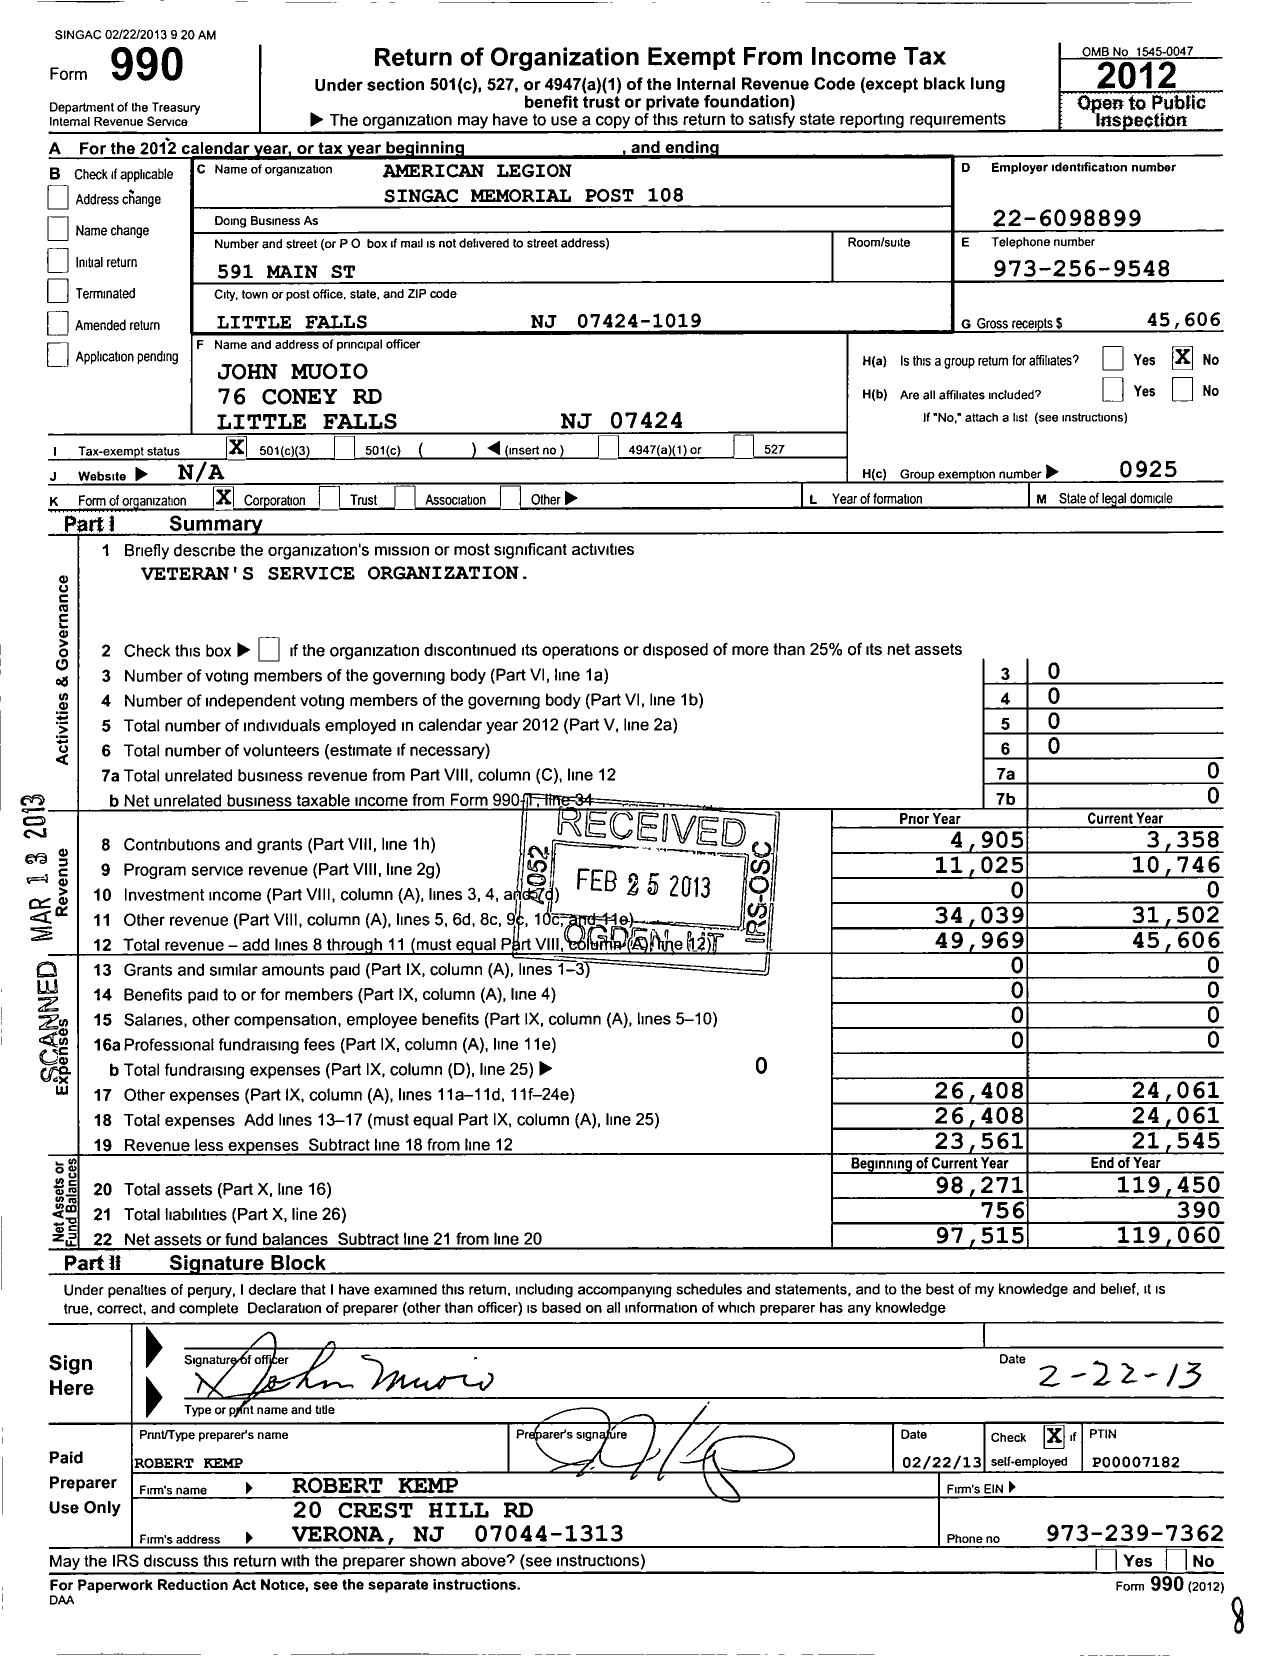 Image of first page of 2012 Form 990 for American Legion Singac Memorial Post 108